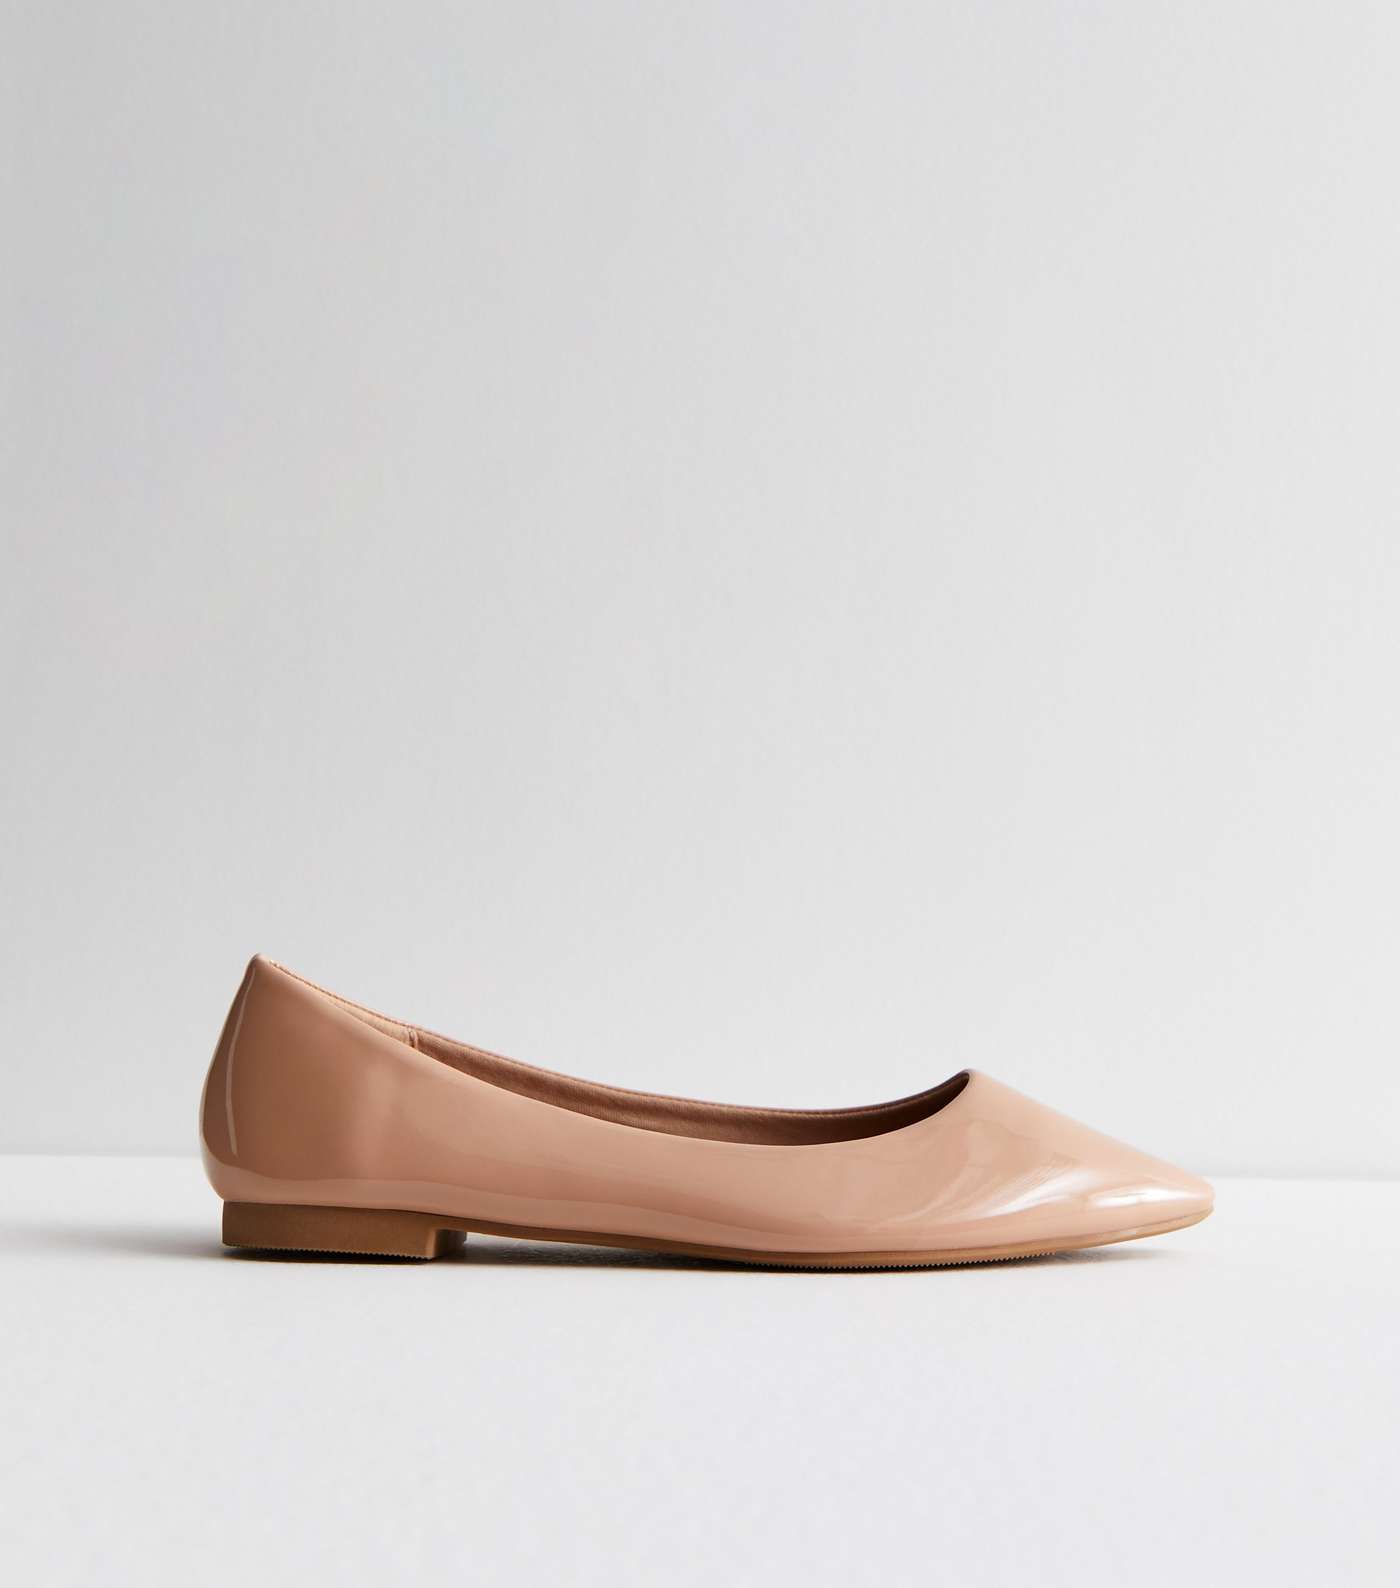 Pale Pink Patent Pointed Toe Ballerina Pumps Image 3